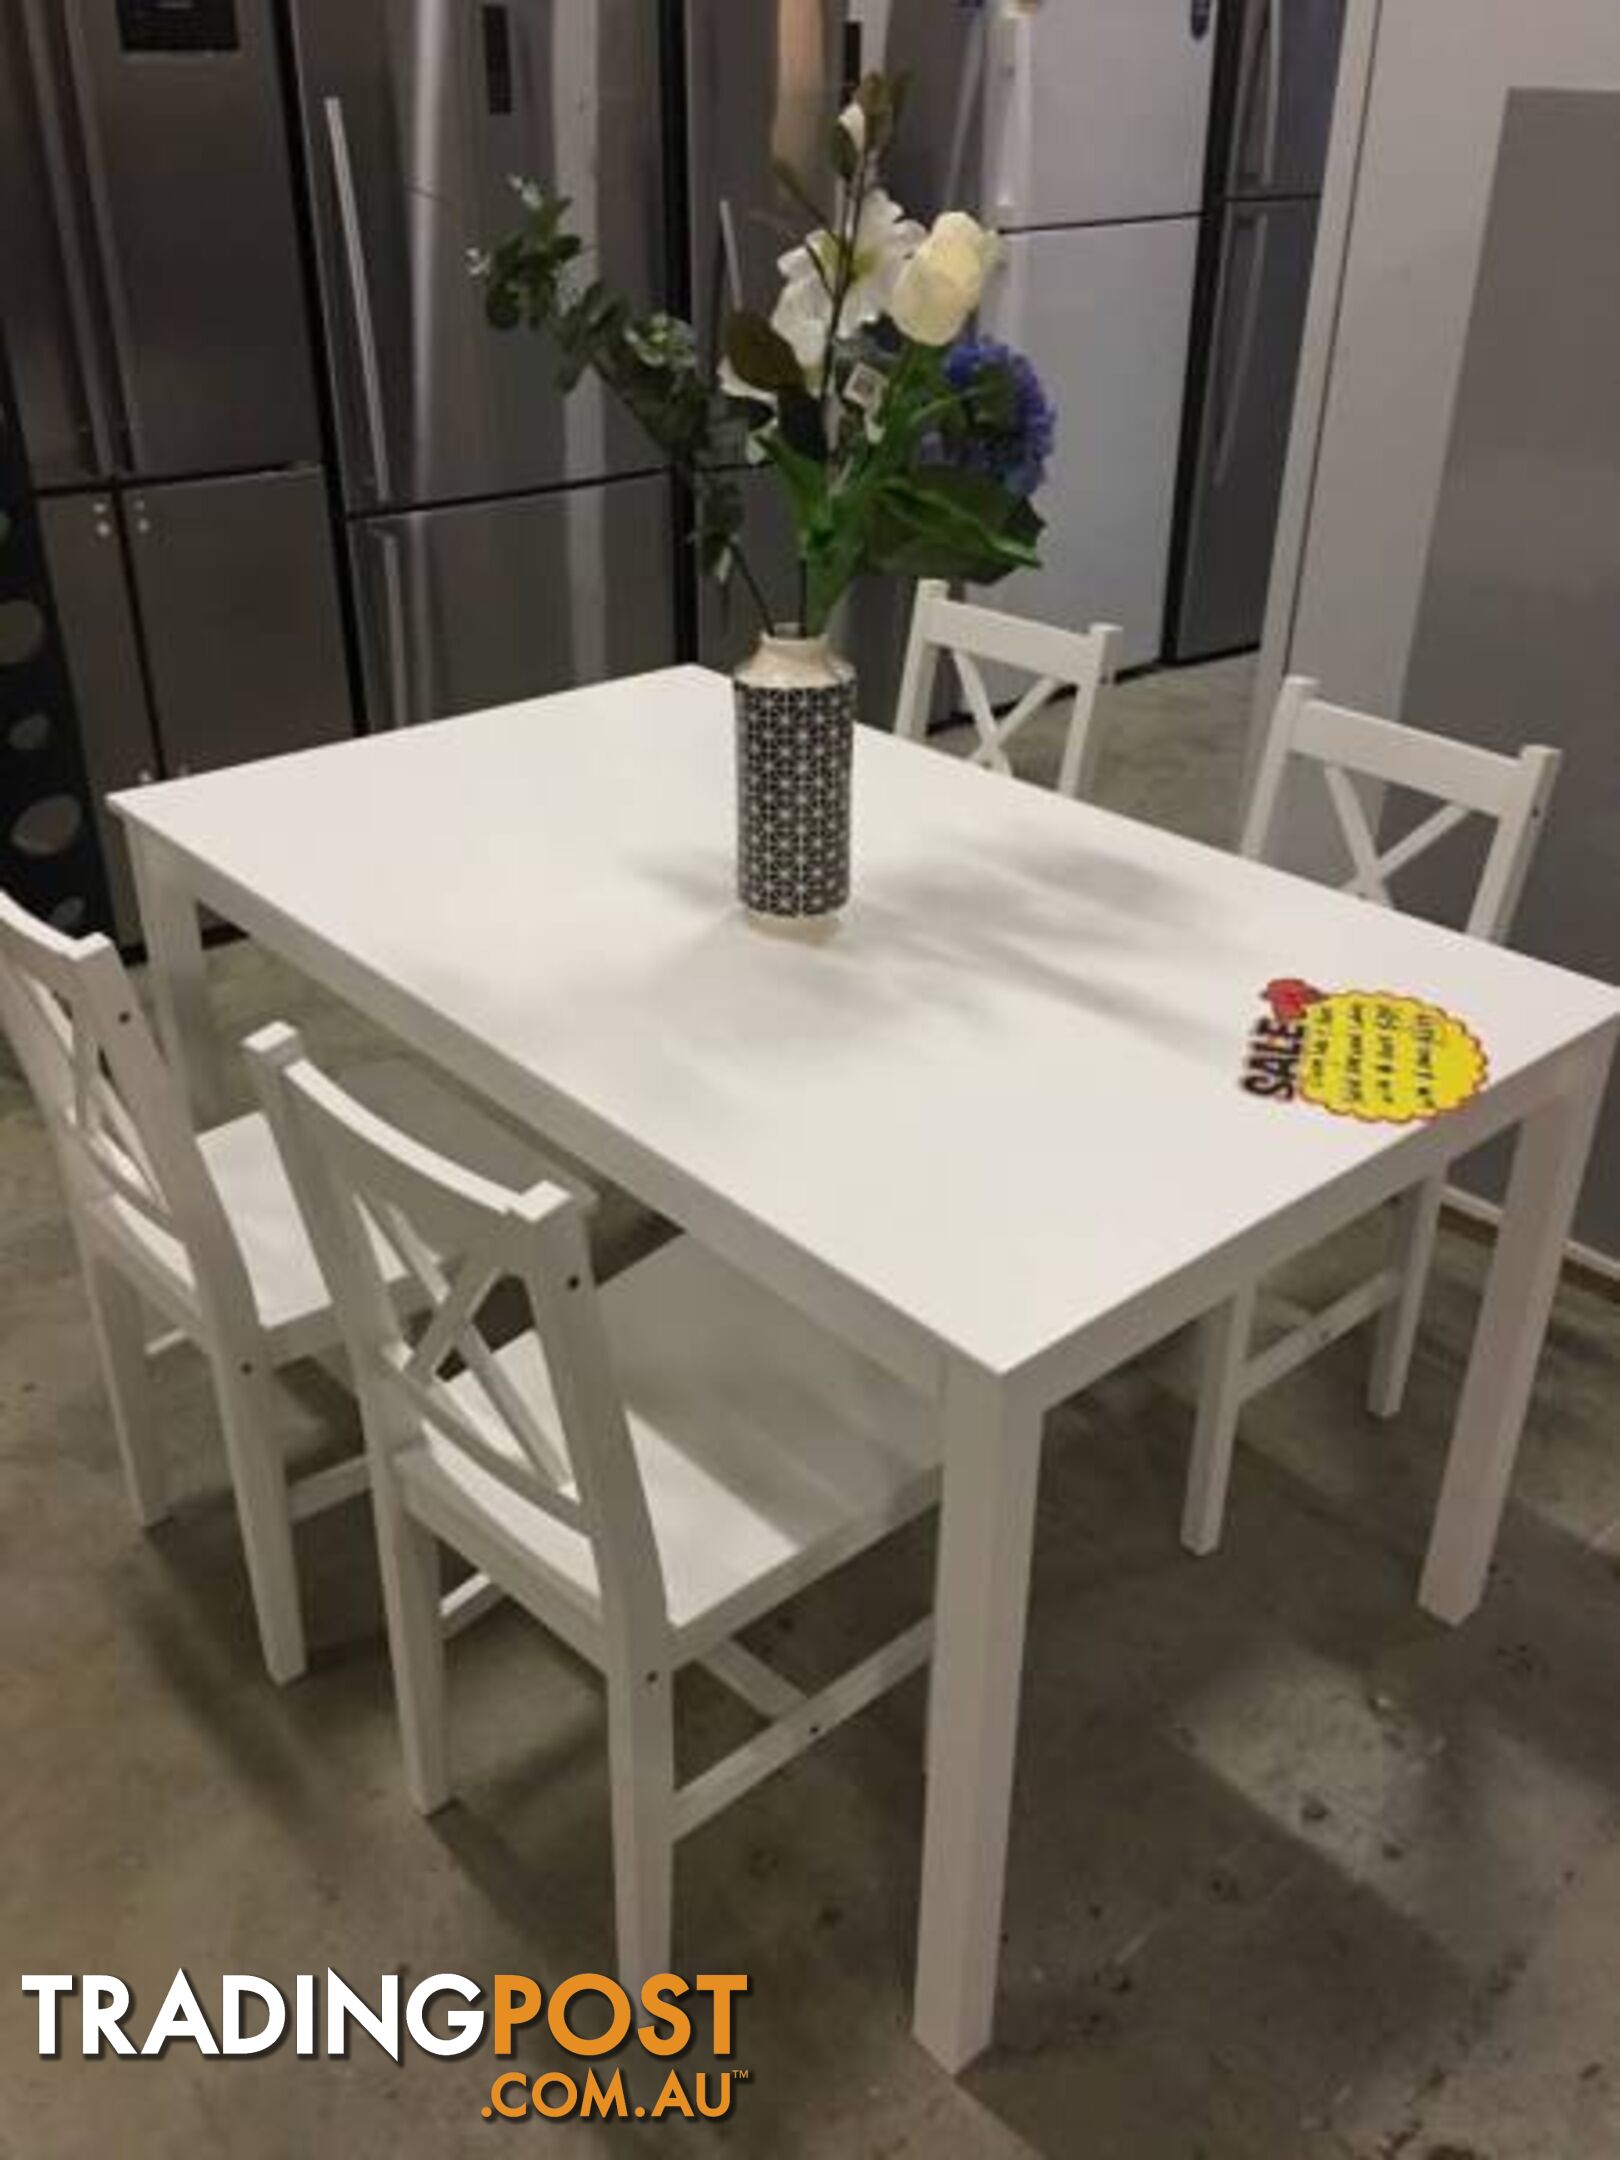 Brand New Solid white PineWood Dining set table with chairs